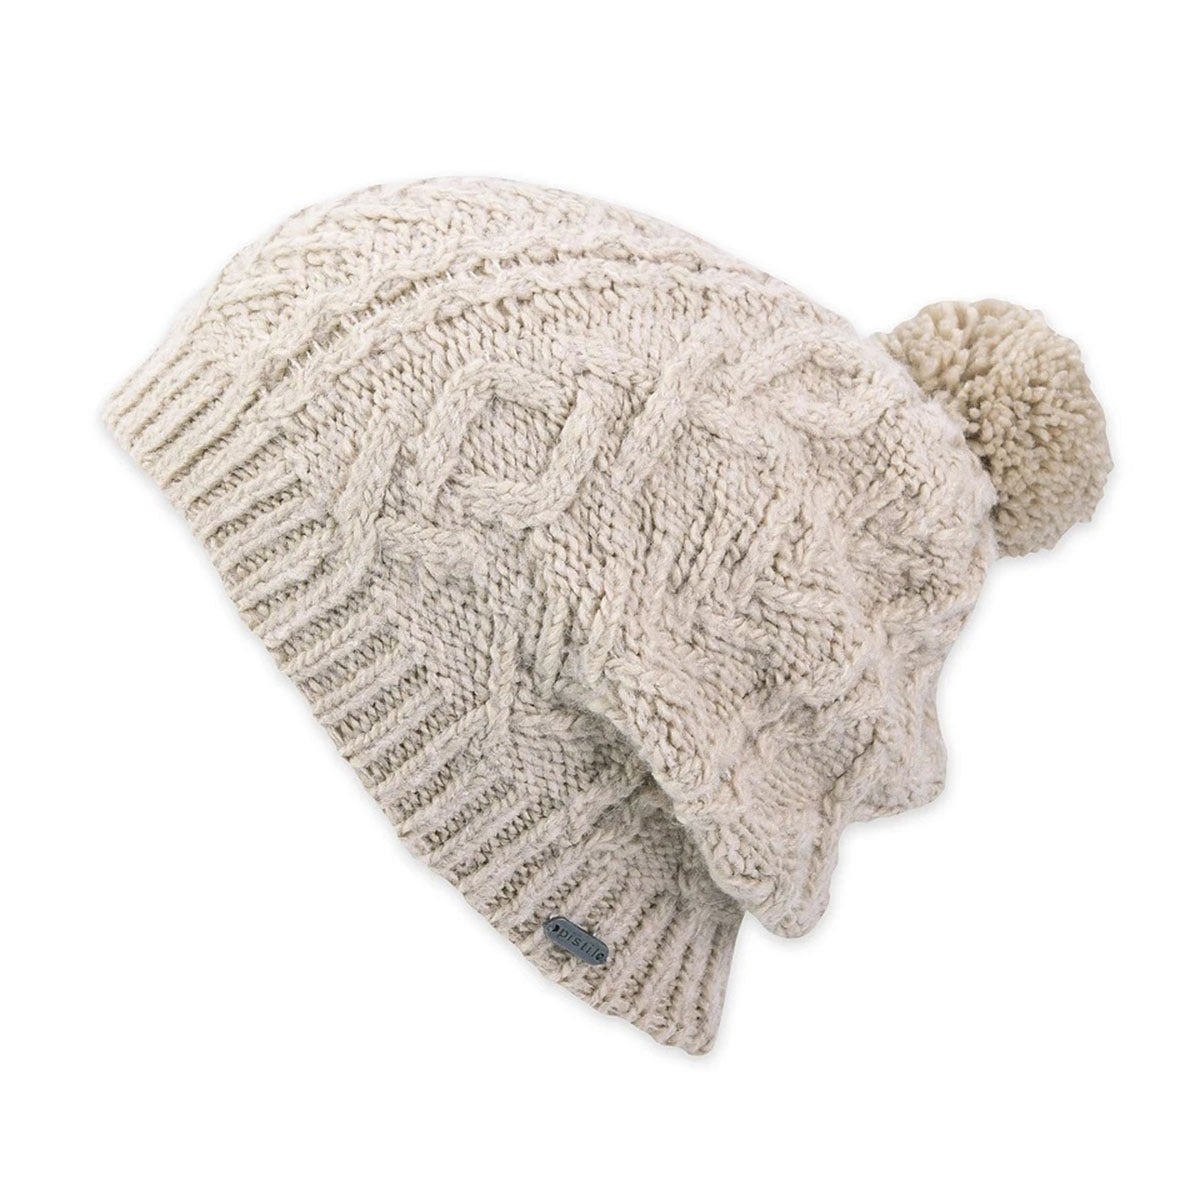 MIO SLOUCH HAT OATMEAL